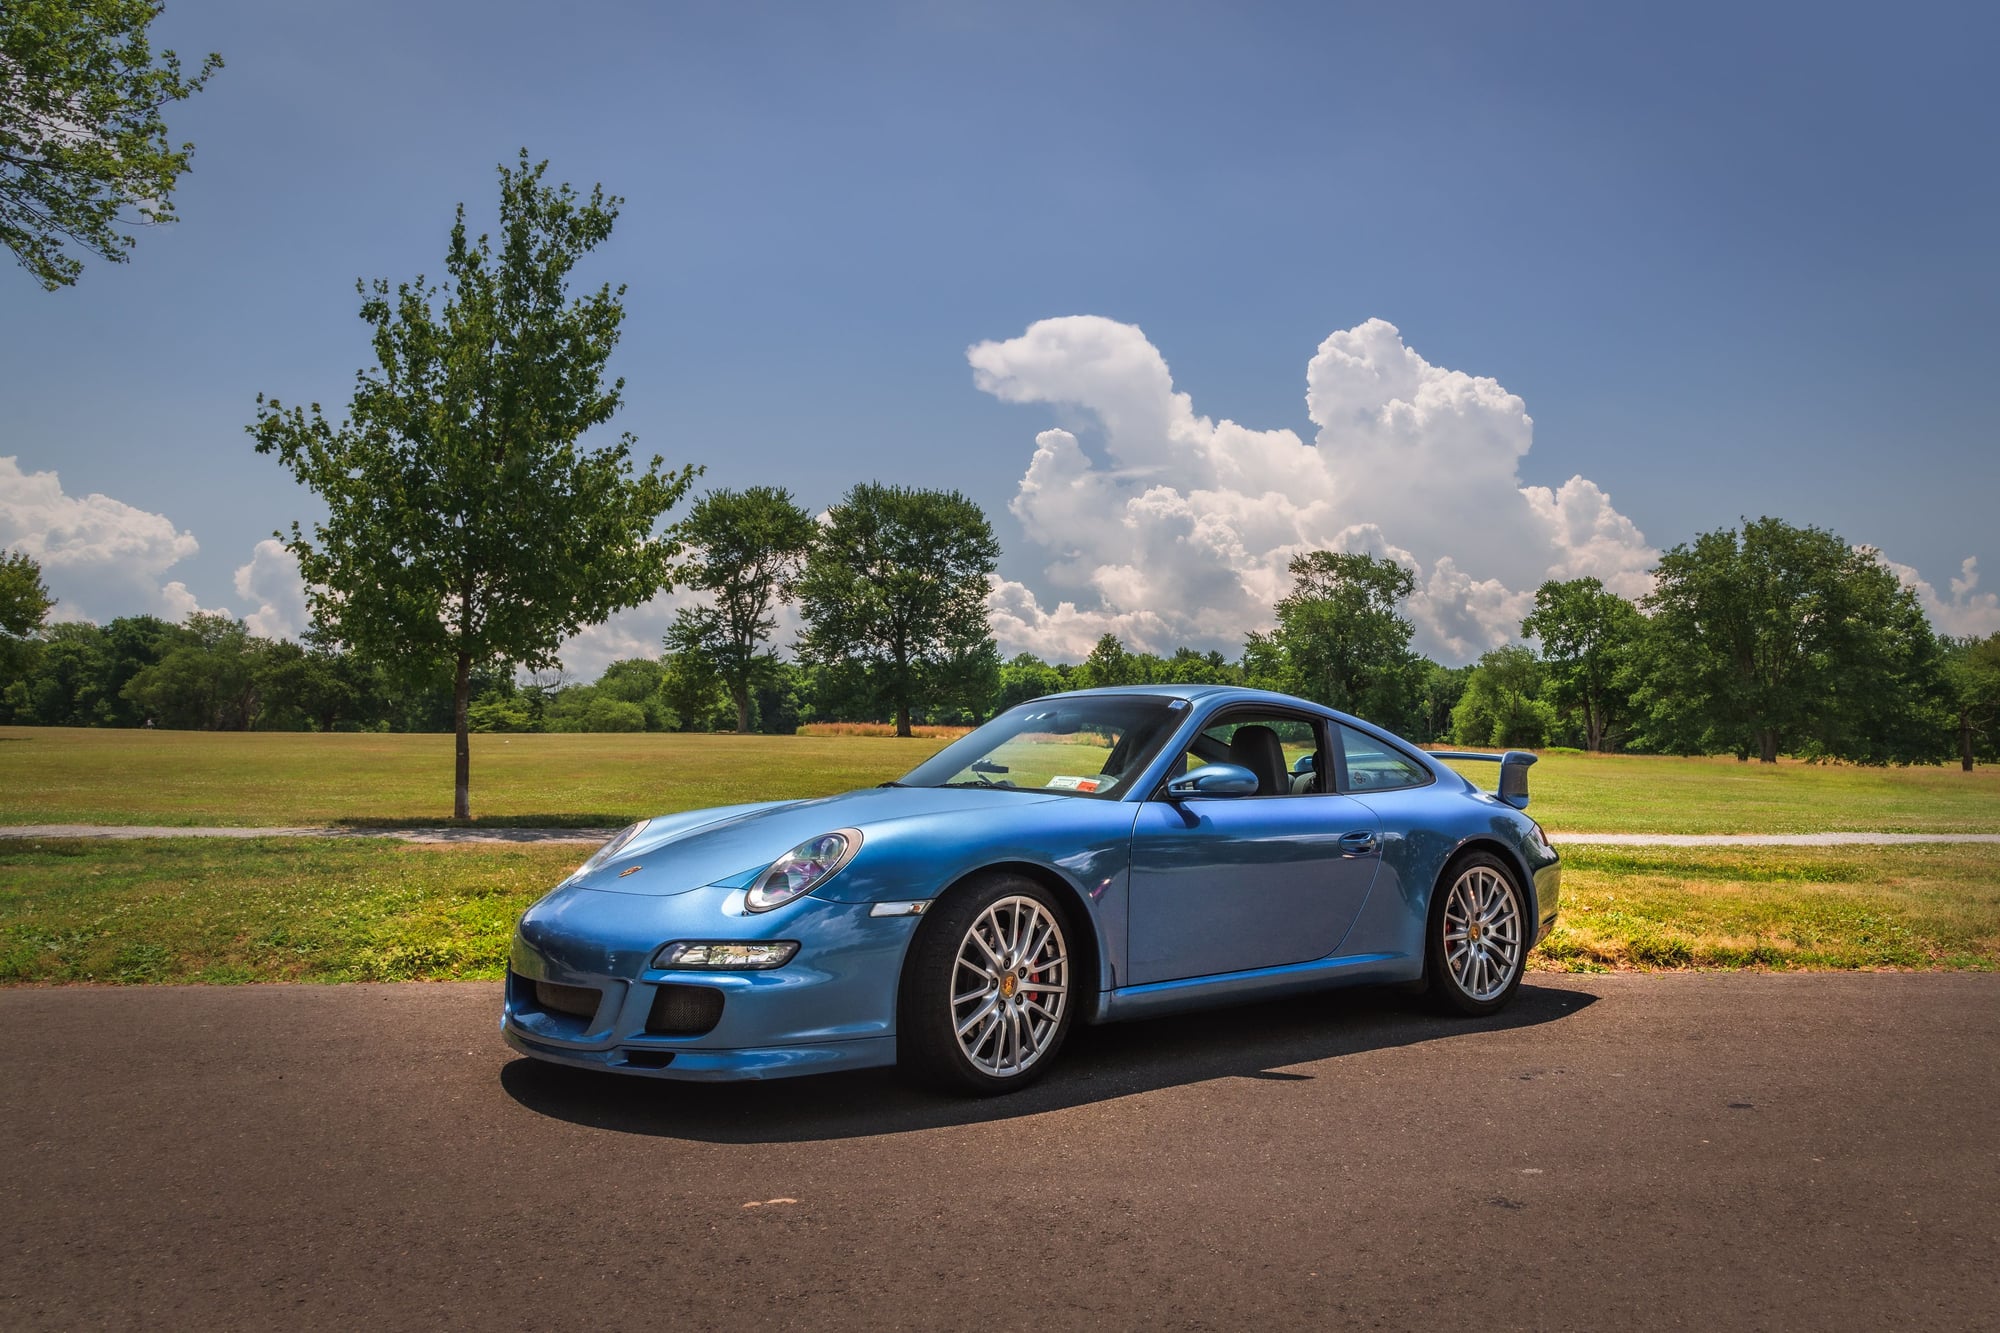 2006 Porsche 911 - (For Sale) ORIGINAL OWNER: 2006 Club Coupe, #7/50, GT3 Factory Aero-kit, X-51 Power - Used - VIN WP0AB299X6S745007 - 19,400 Miles - 6 cyl - 2WD - Manual - Coupe - Blue - Great Neck, NY 11024, United States